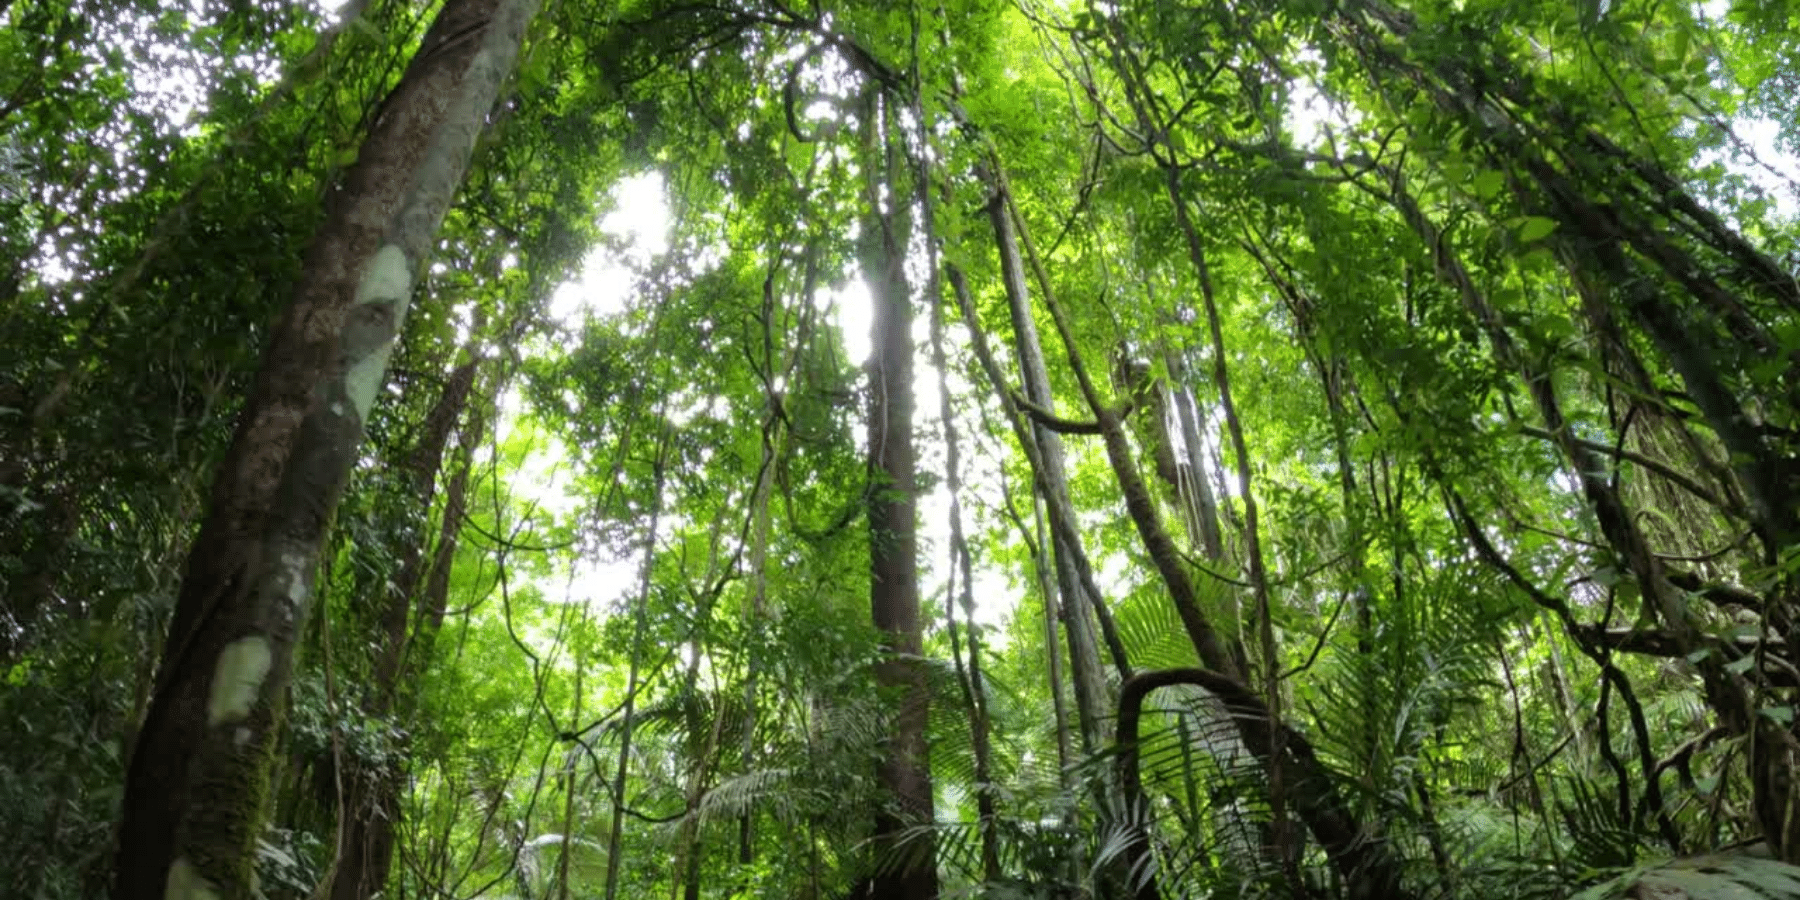 From the forest floor, looking up at trunks of rainforest trees into the green canopy above.